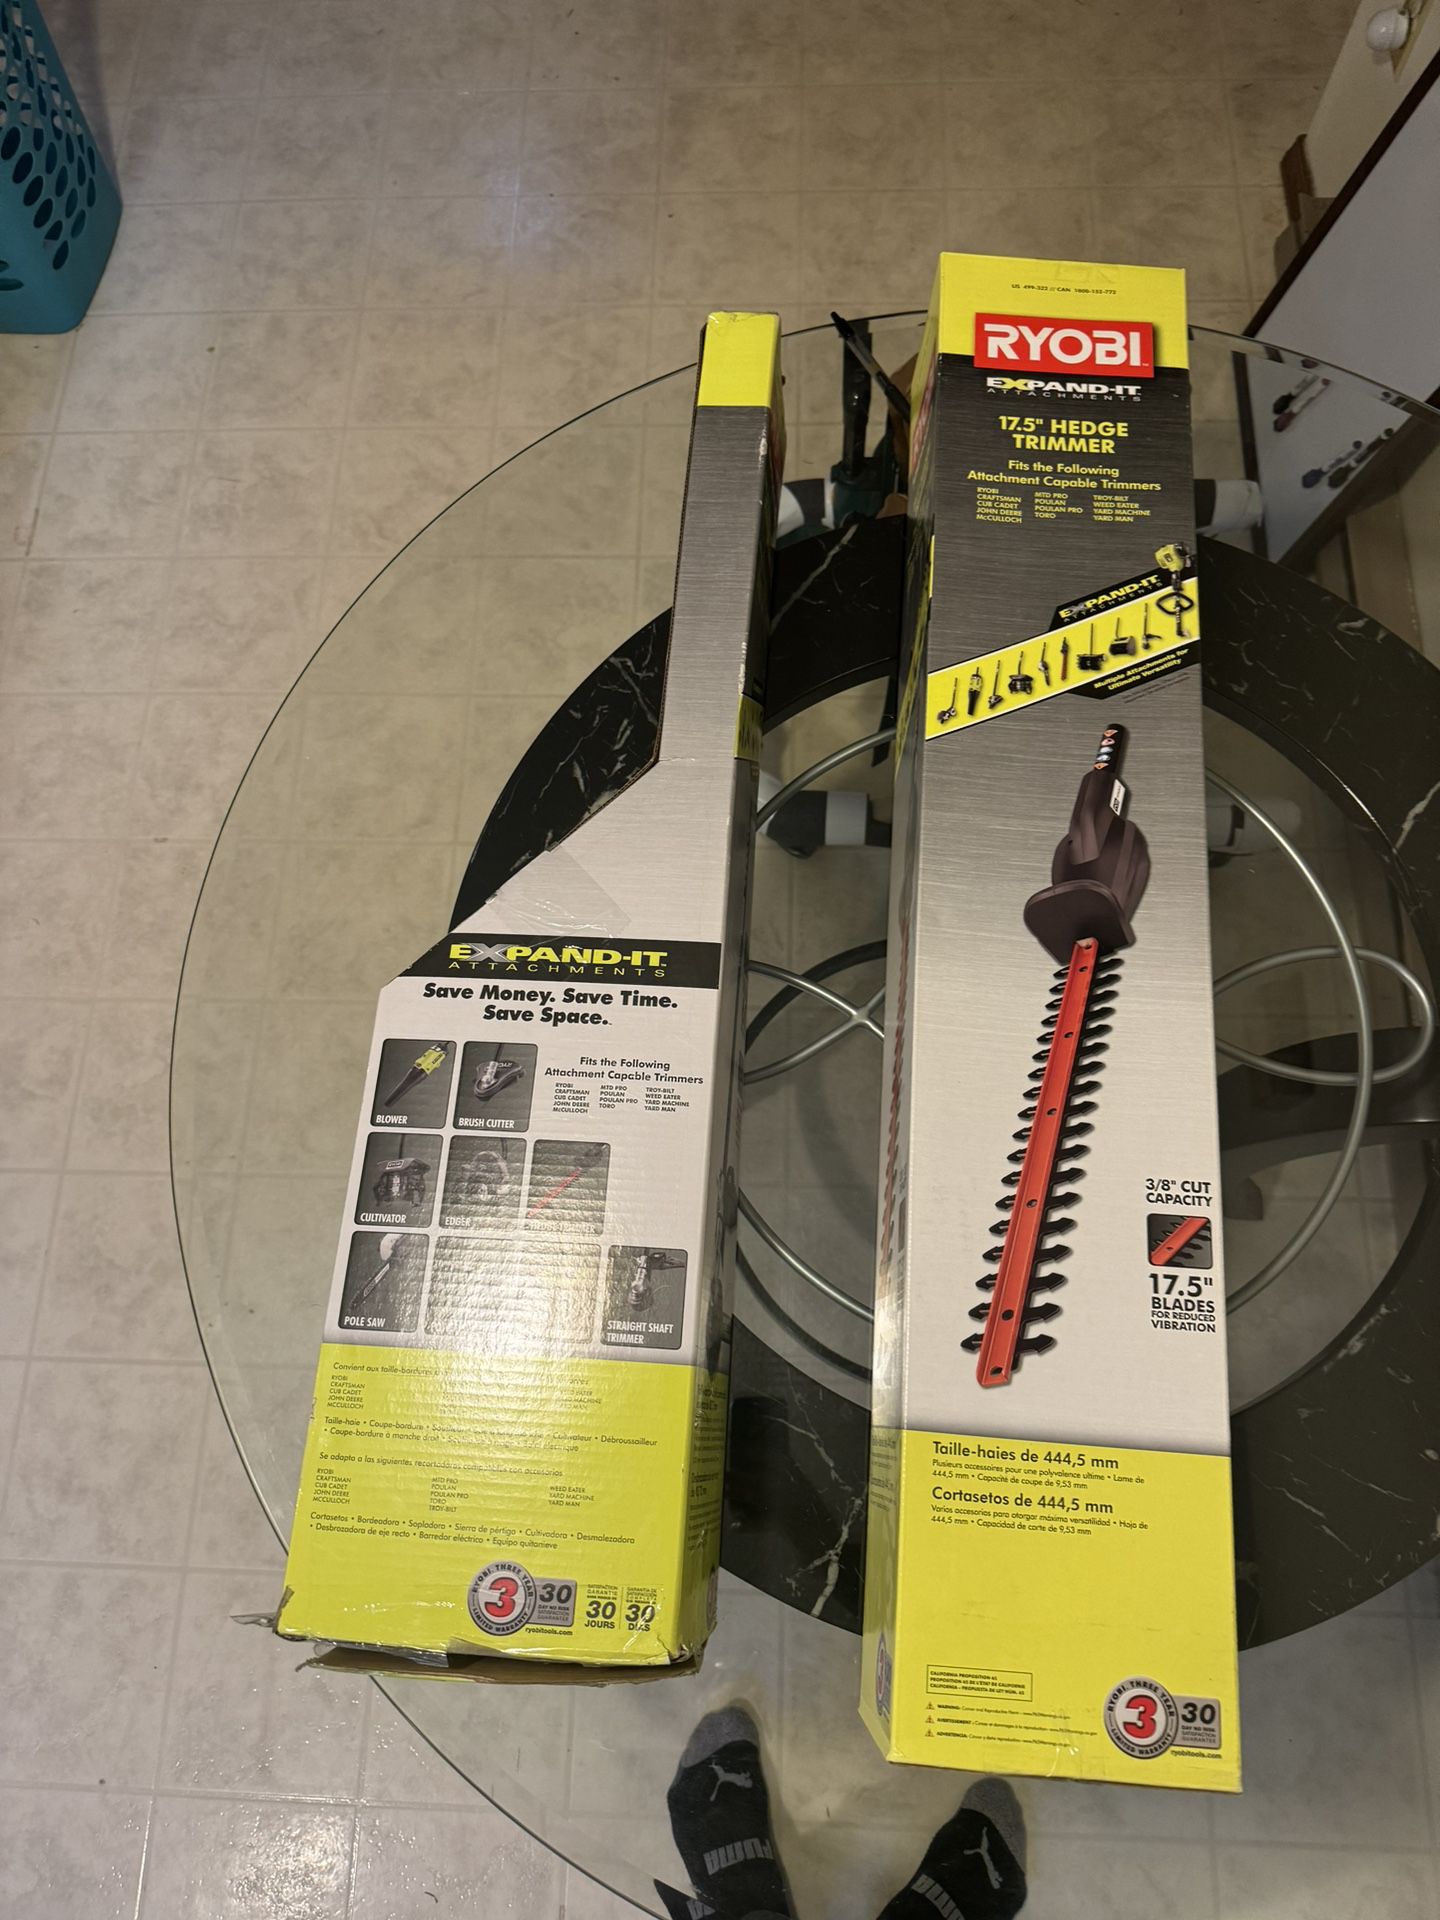 Ryobi expand It Hedge Trimmer And String Trimmer